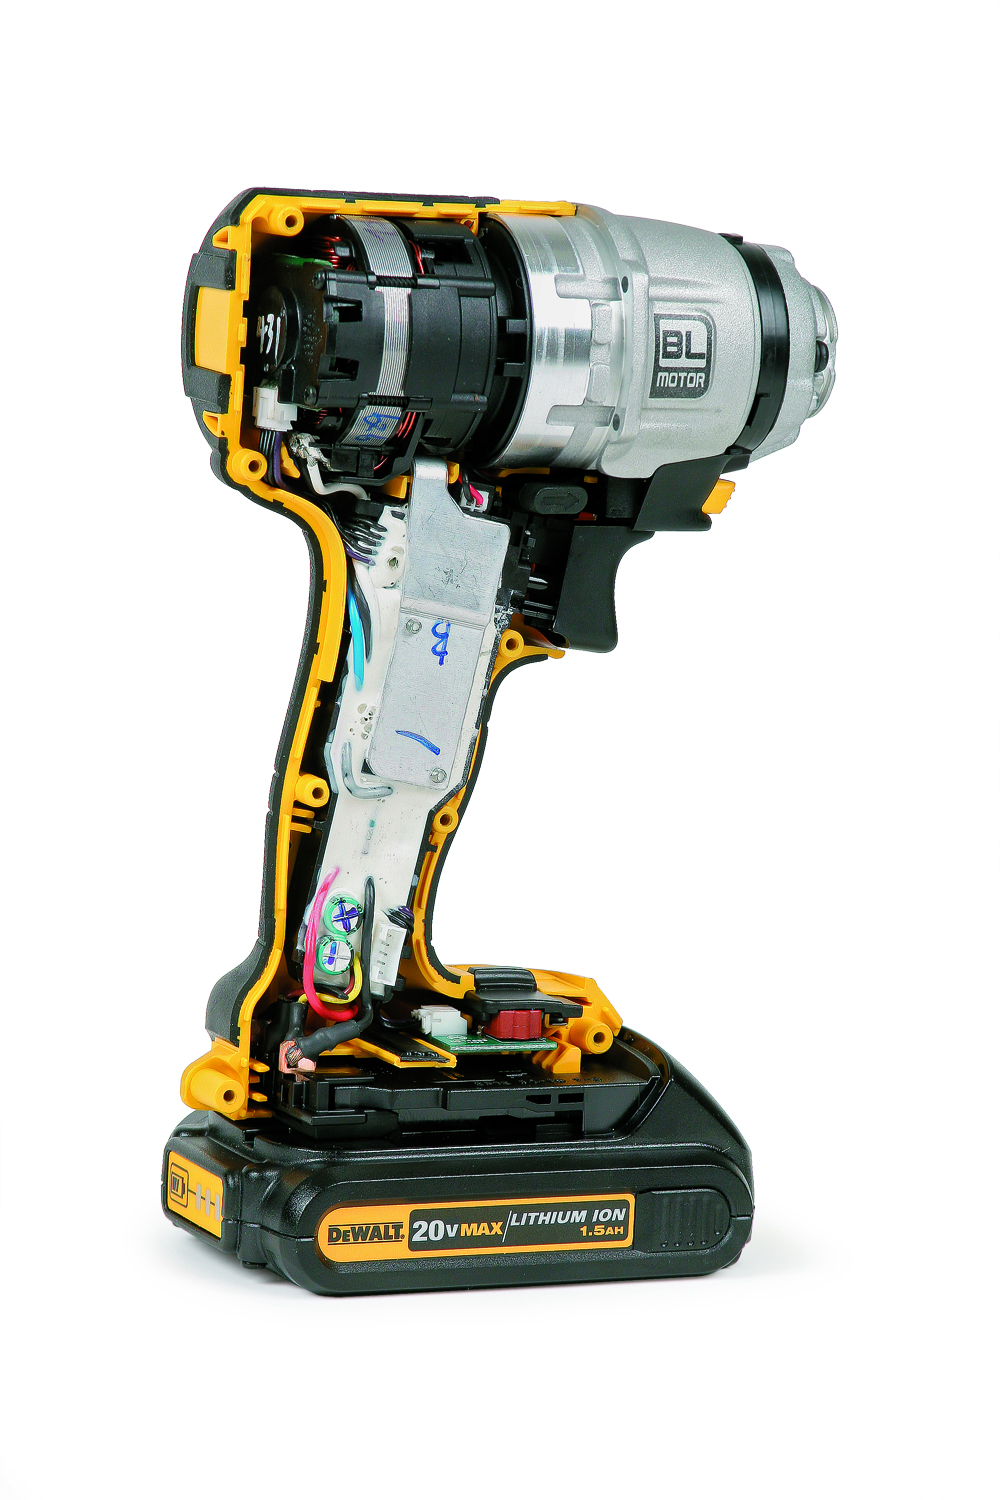 Get the Best Cordless Drill - Fine Homebuilding